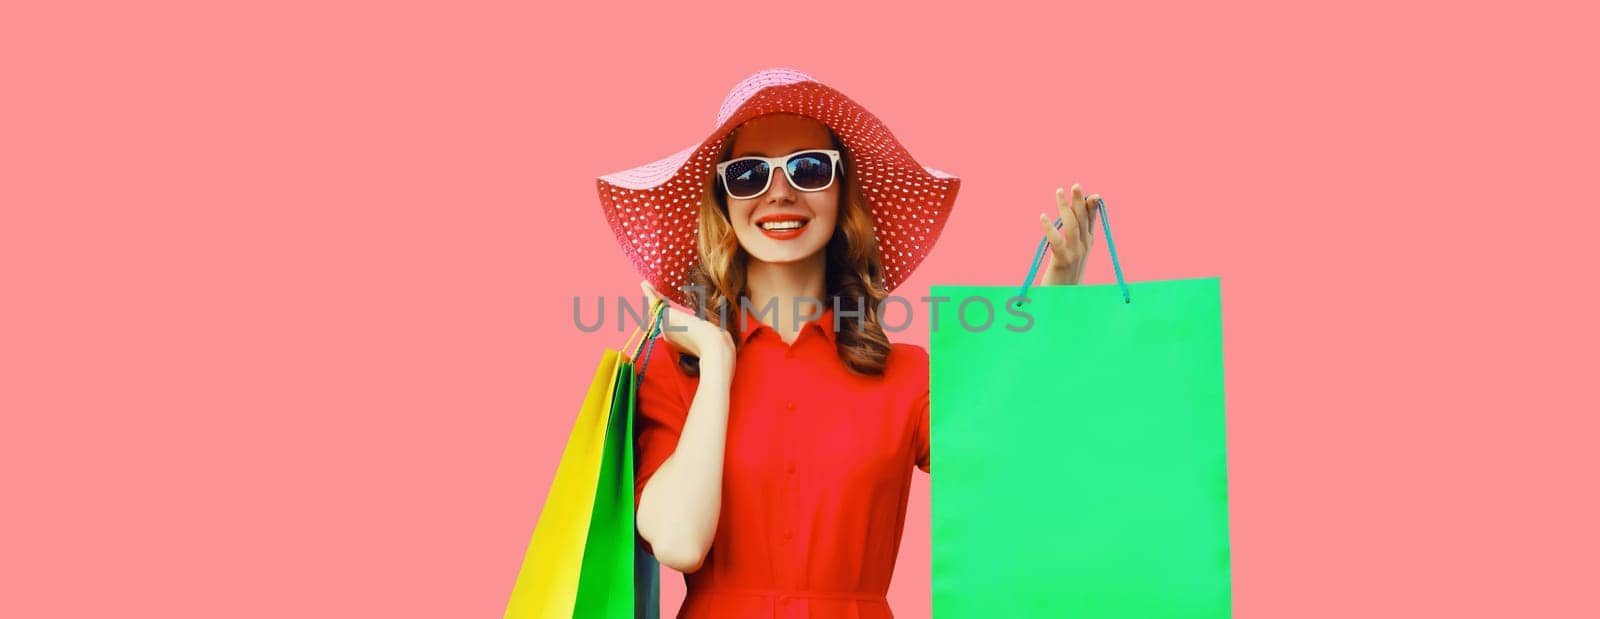 Portrait of beautiful happy smiling young woman model posing with colorful shopping bags wearing summer straw hat, dress on pink studio background